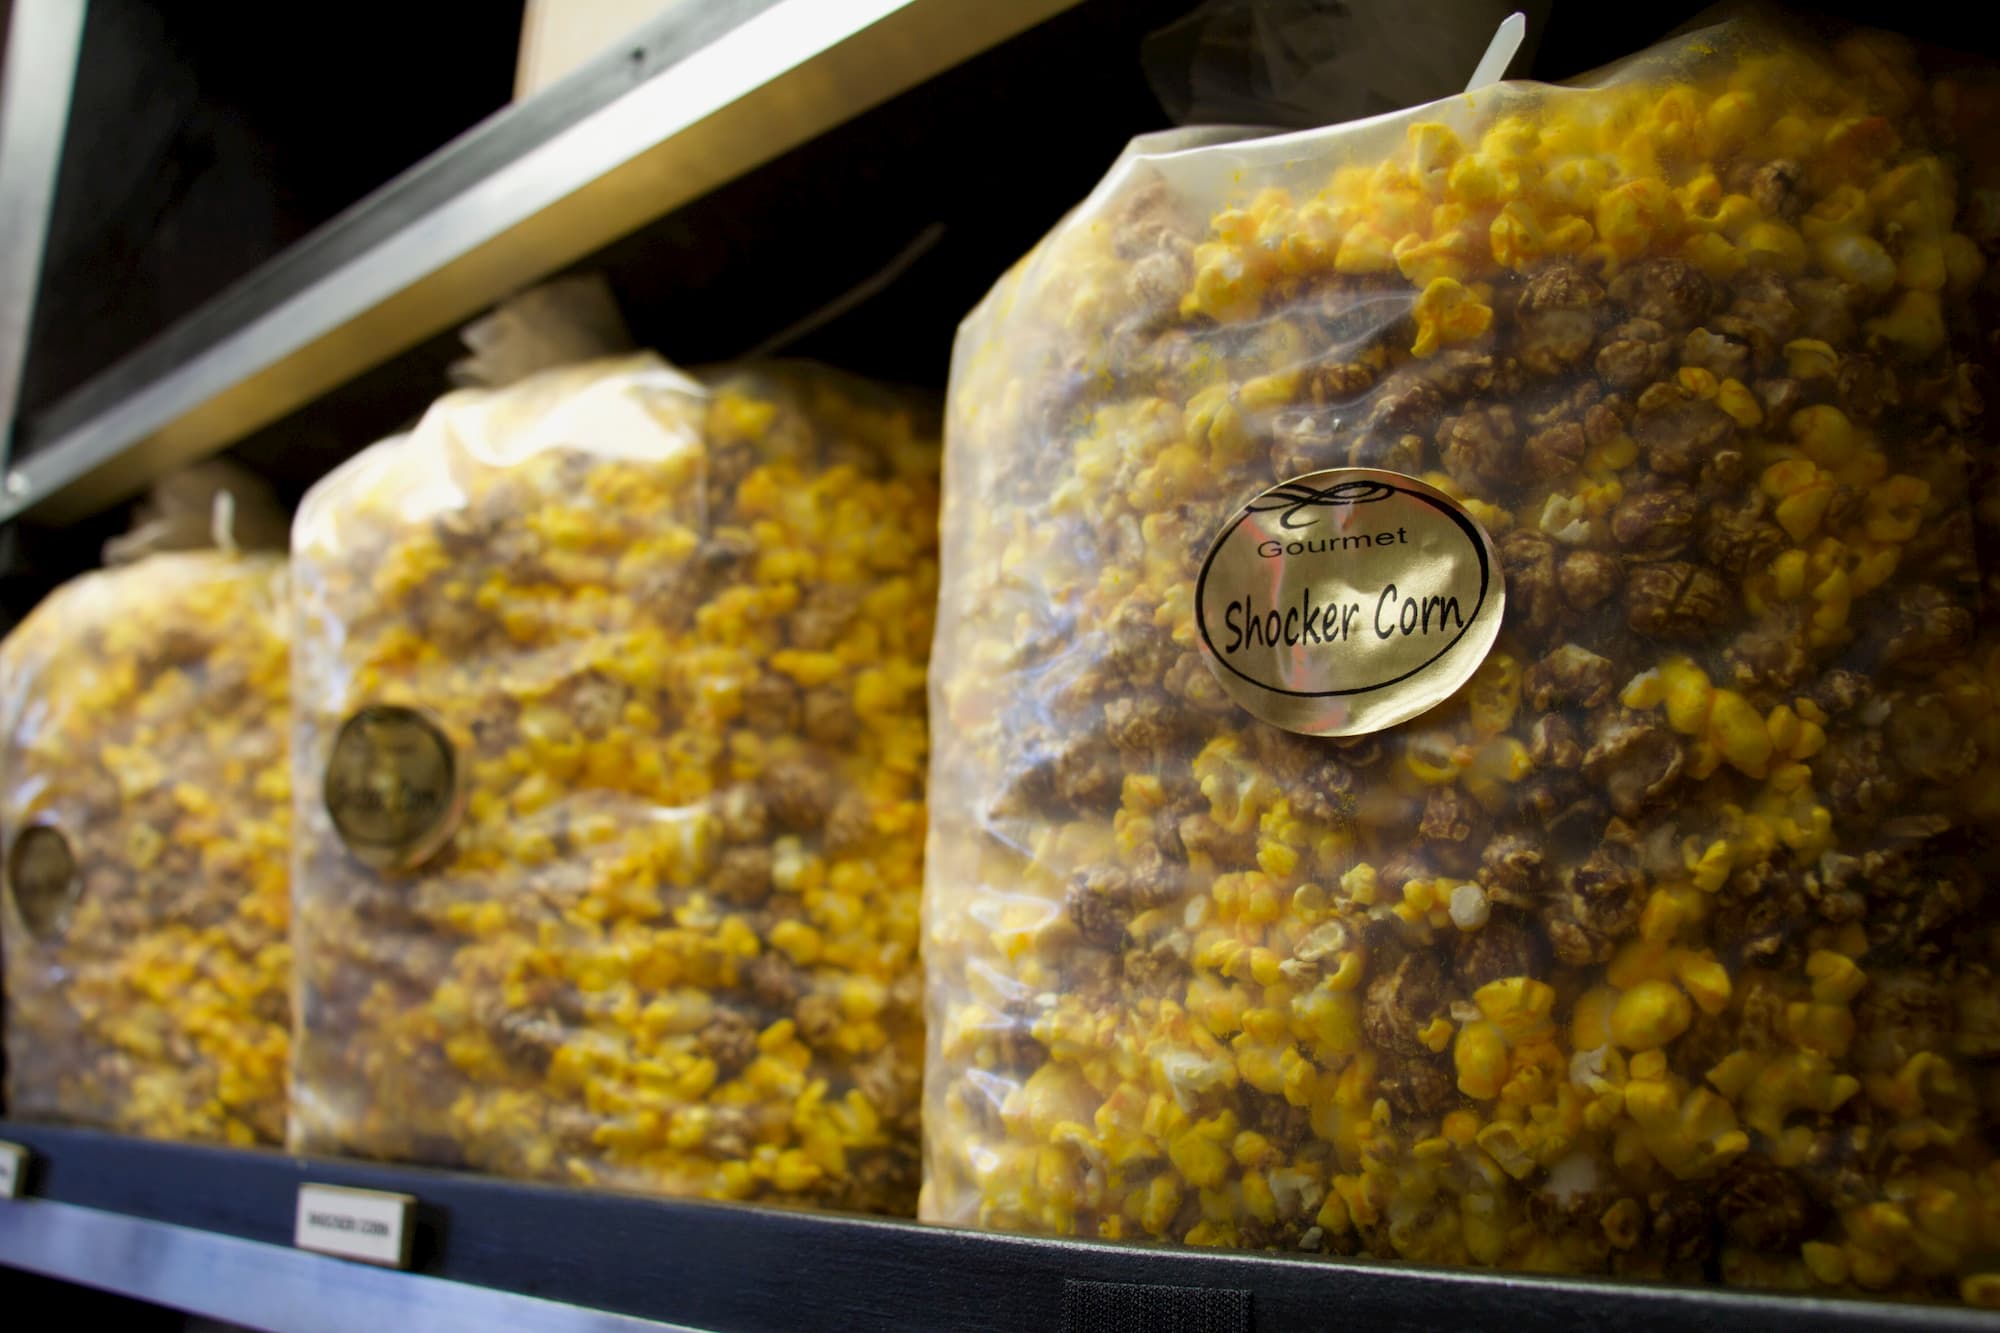 Bags of popcorn sit on shelves at Kernel's Popcorn Express in Wichita